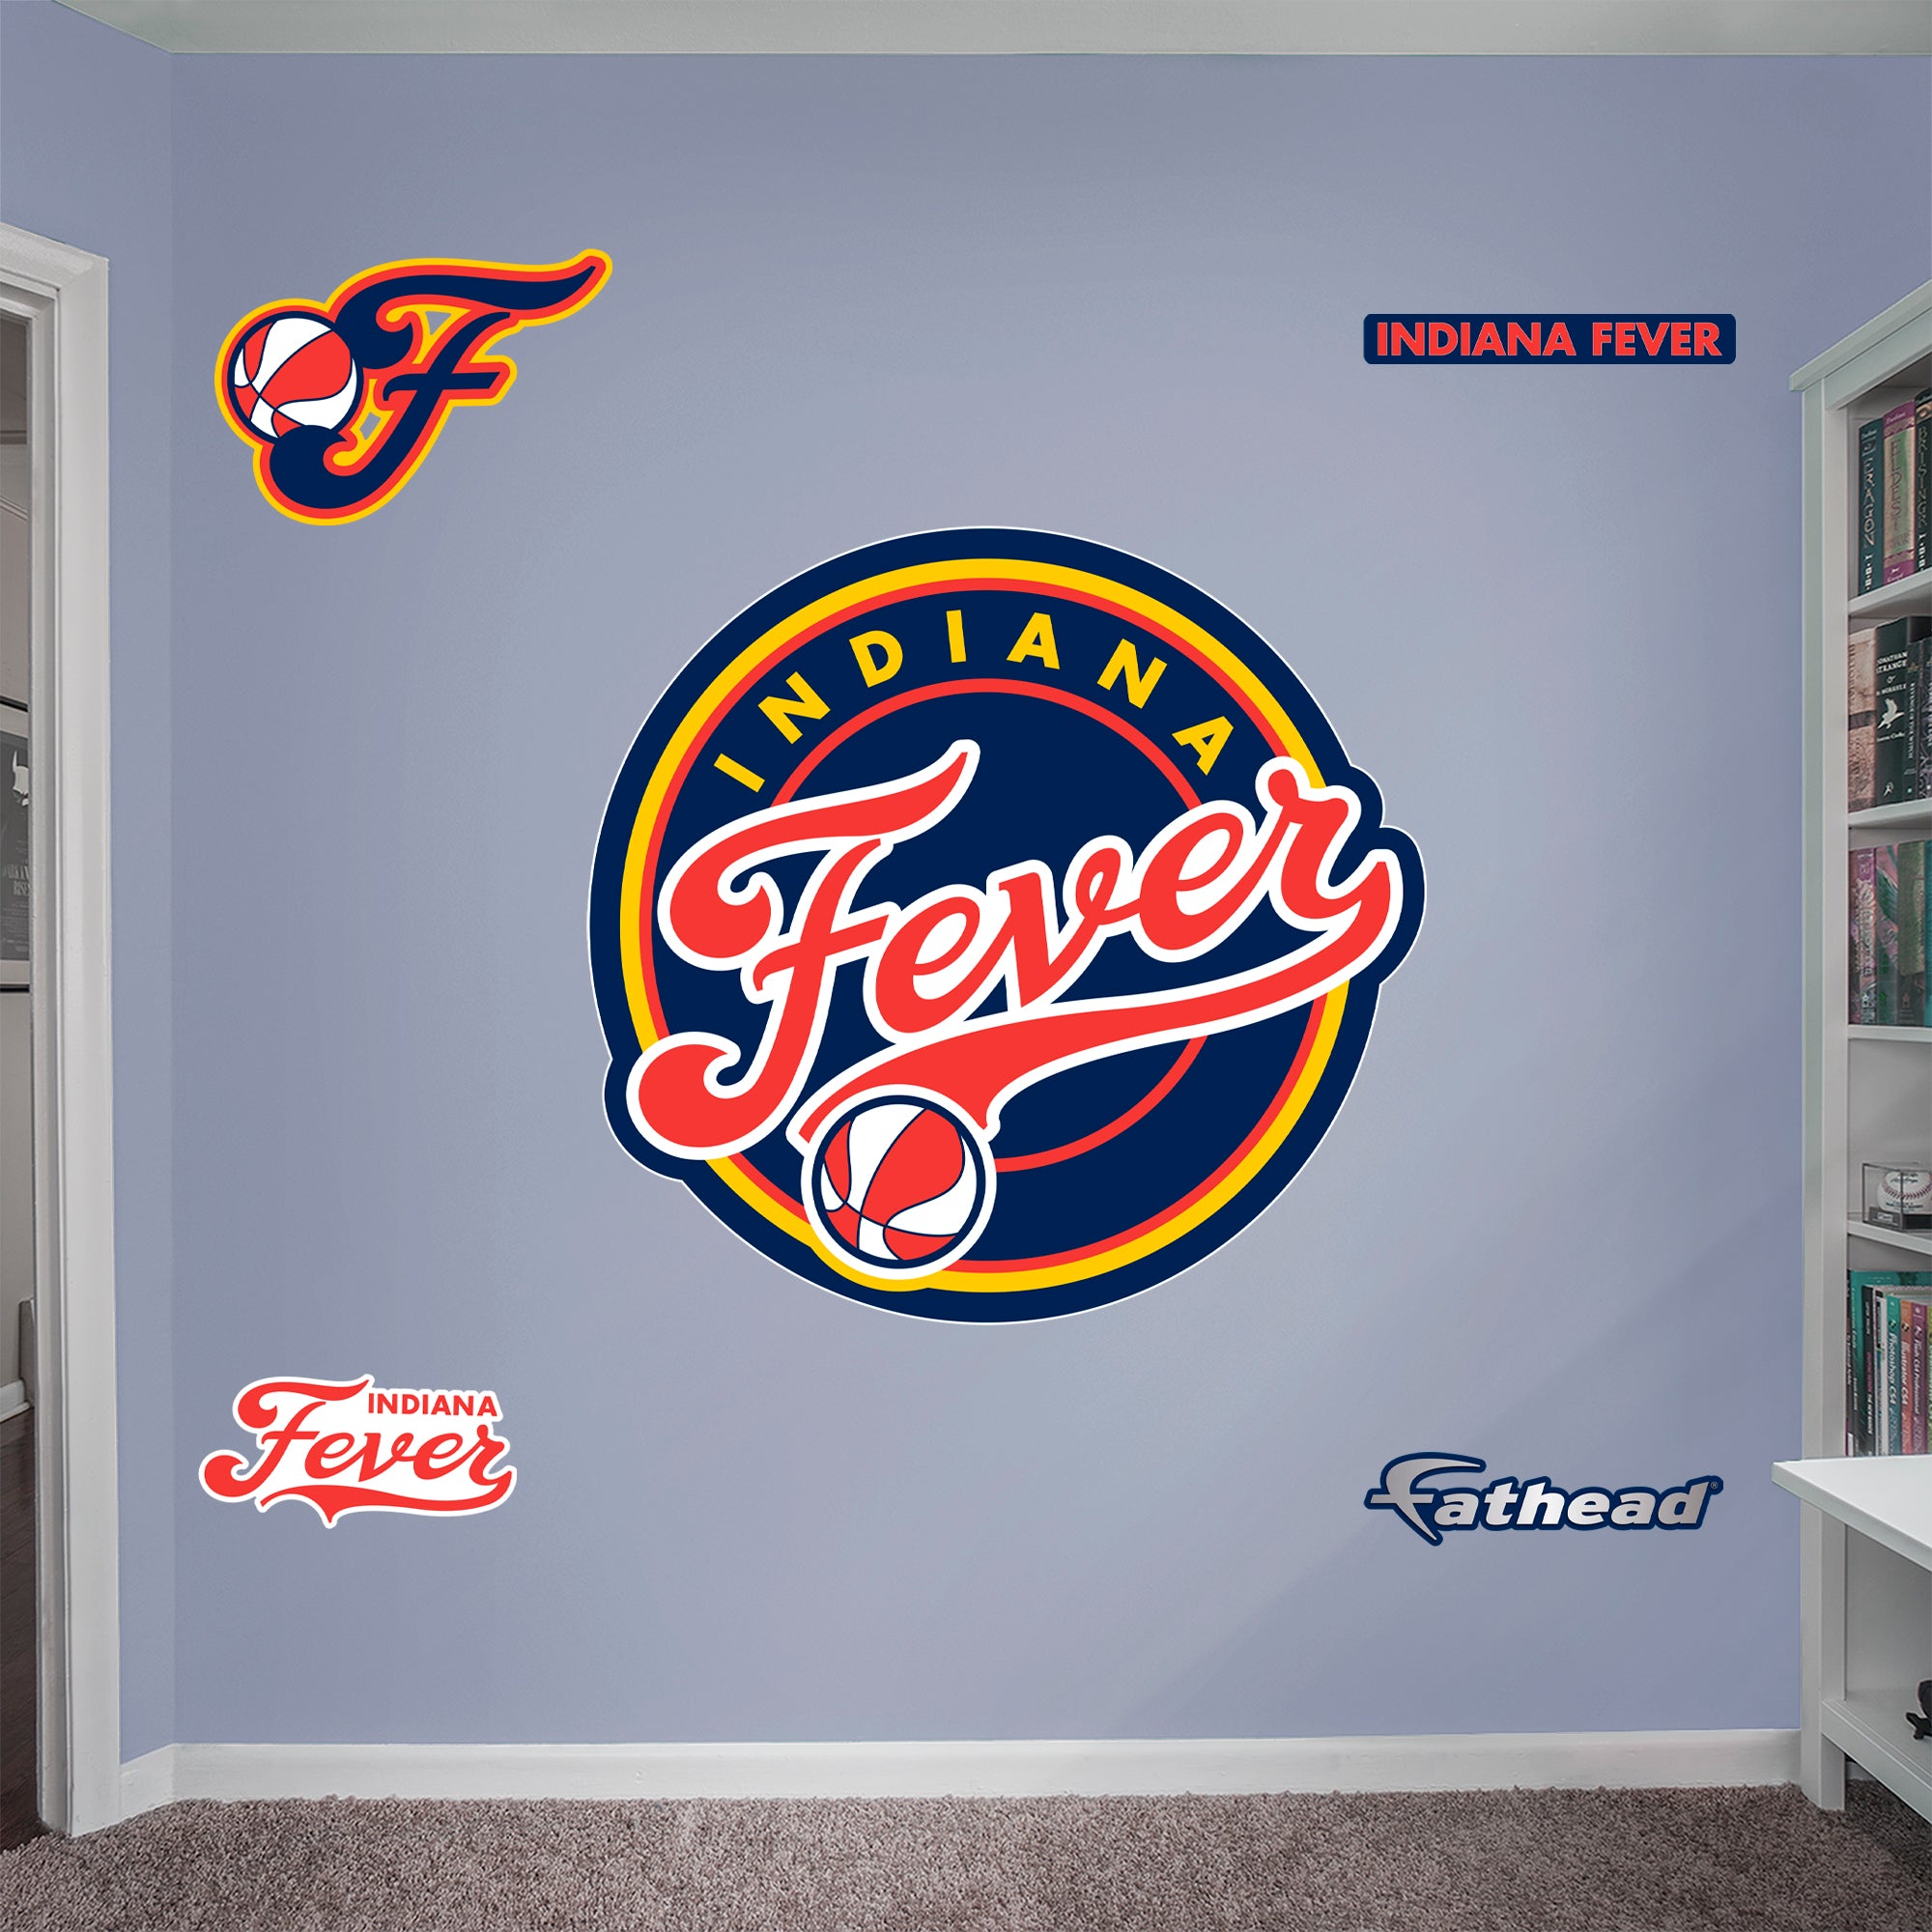 Indiana Fever: Logo - Officially Licensed WNBA Removable Wall Decal Giant + 4 Decals by Fathead | Vinyl